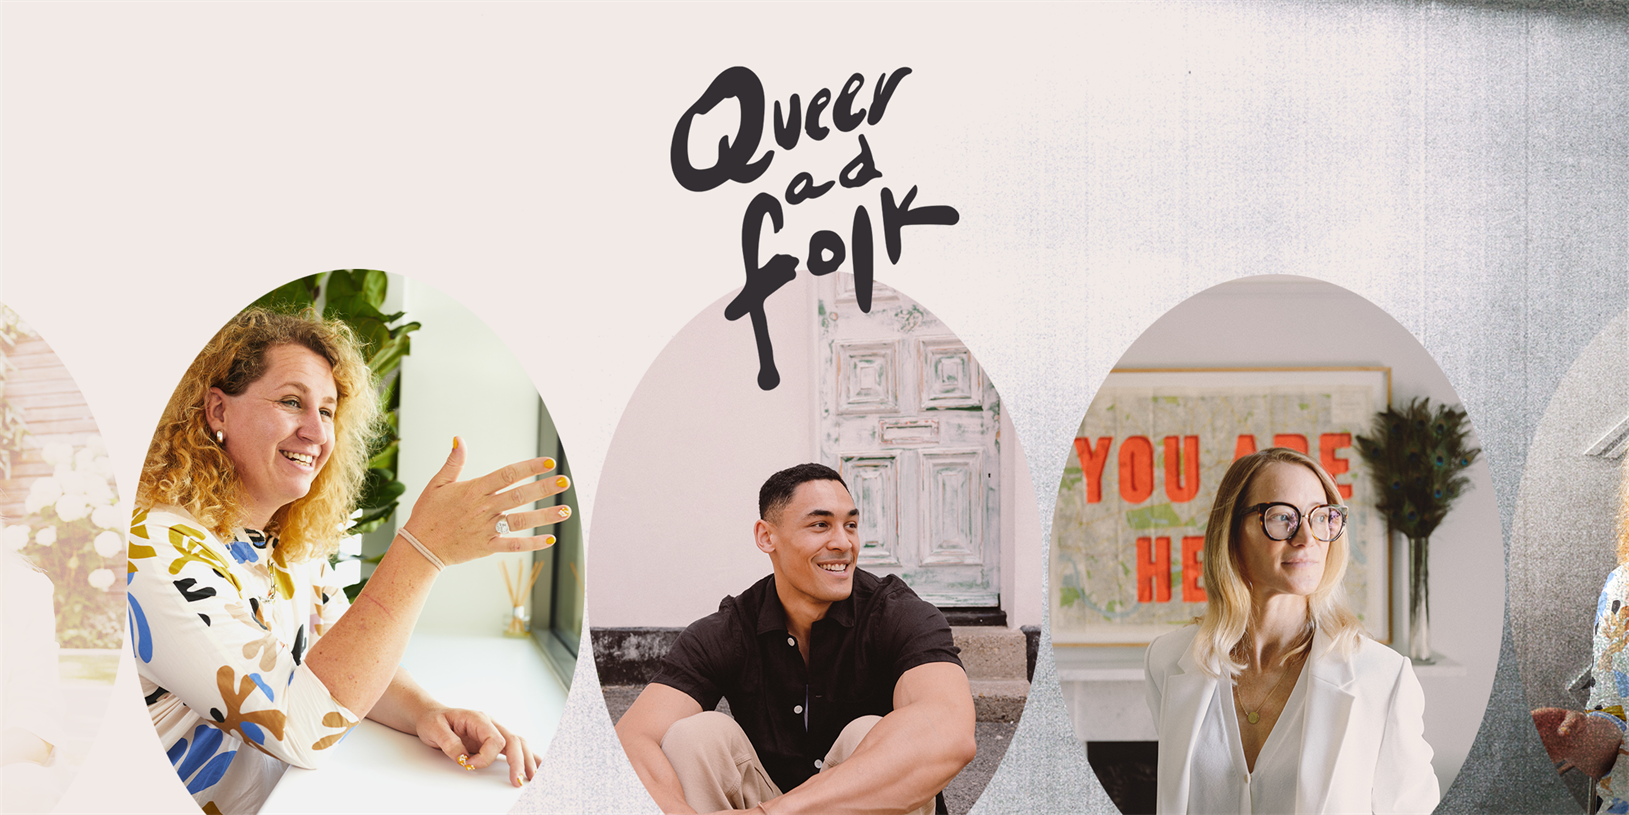 Queer Ad Folk: queer joy and wisdom deserve to be seen and heard